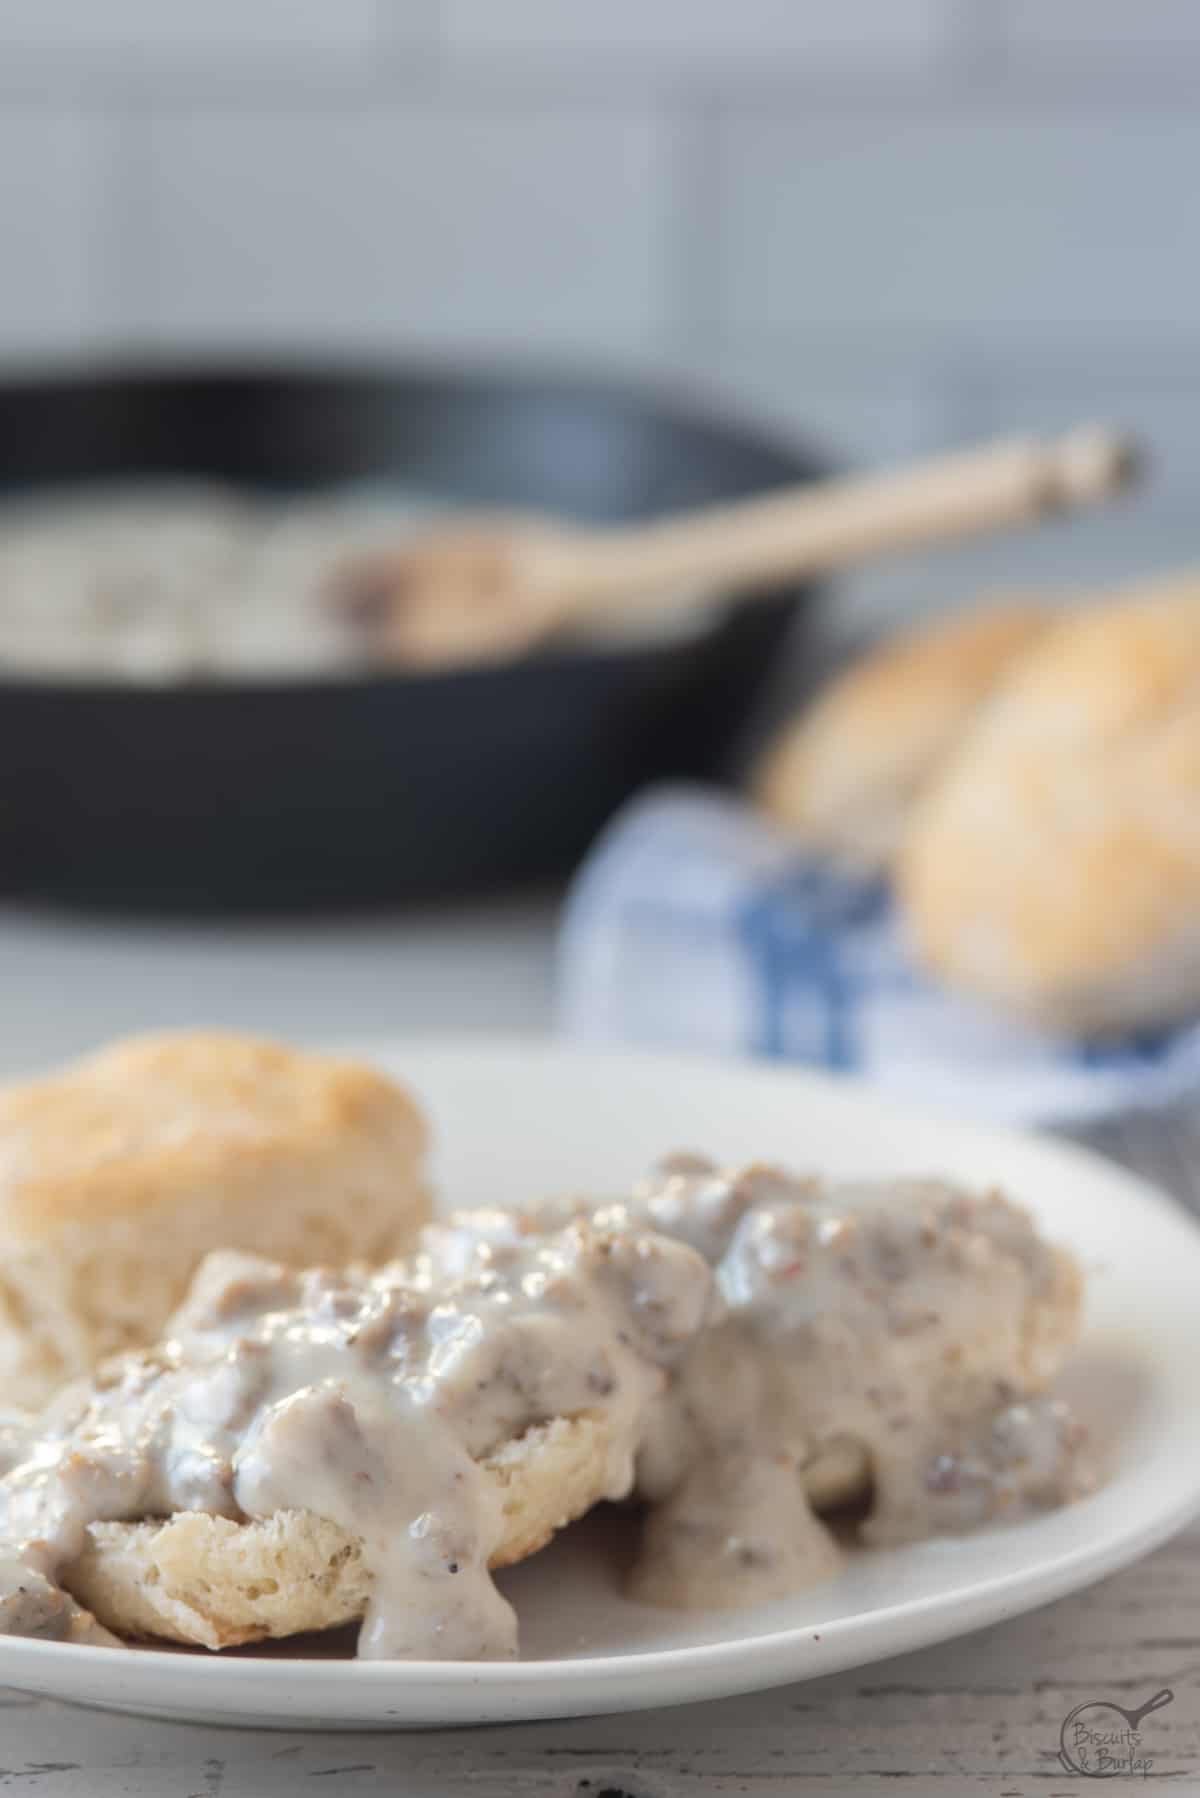 biscuits with sausage gravy over and skillet behind